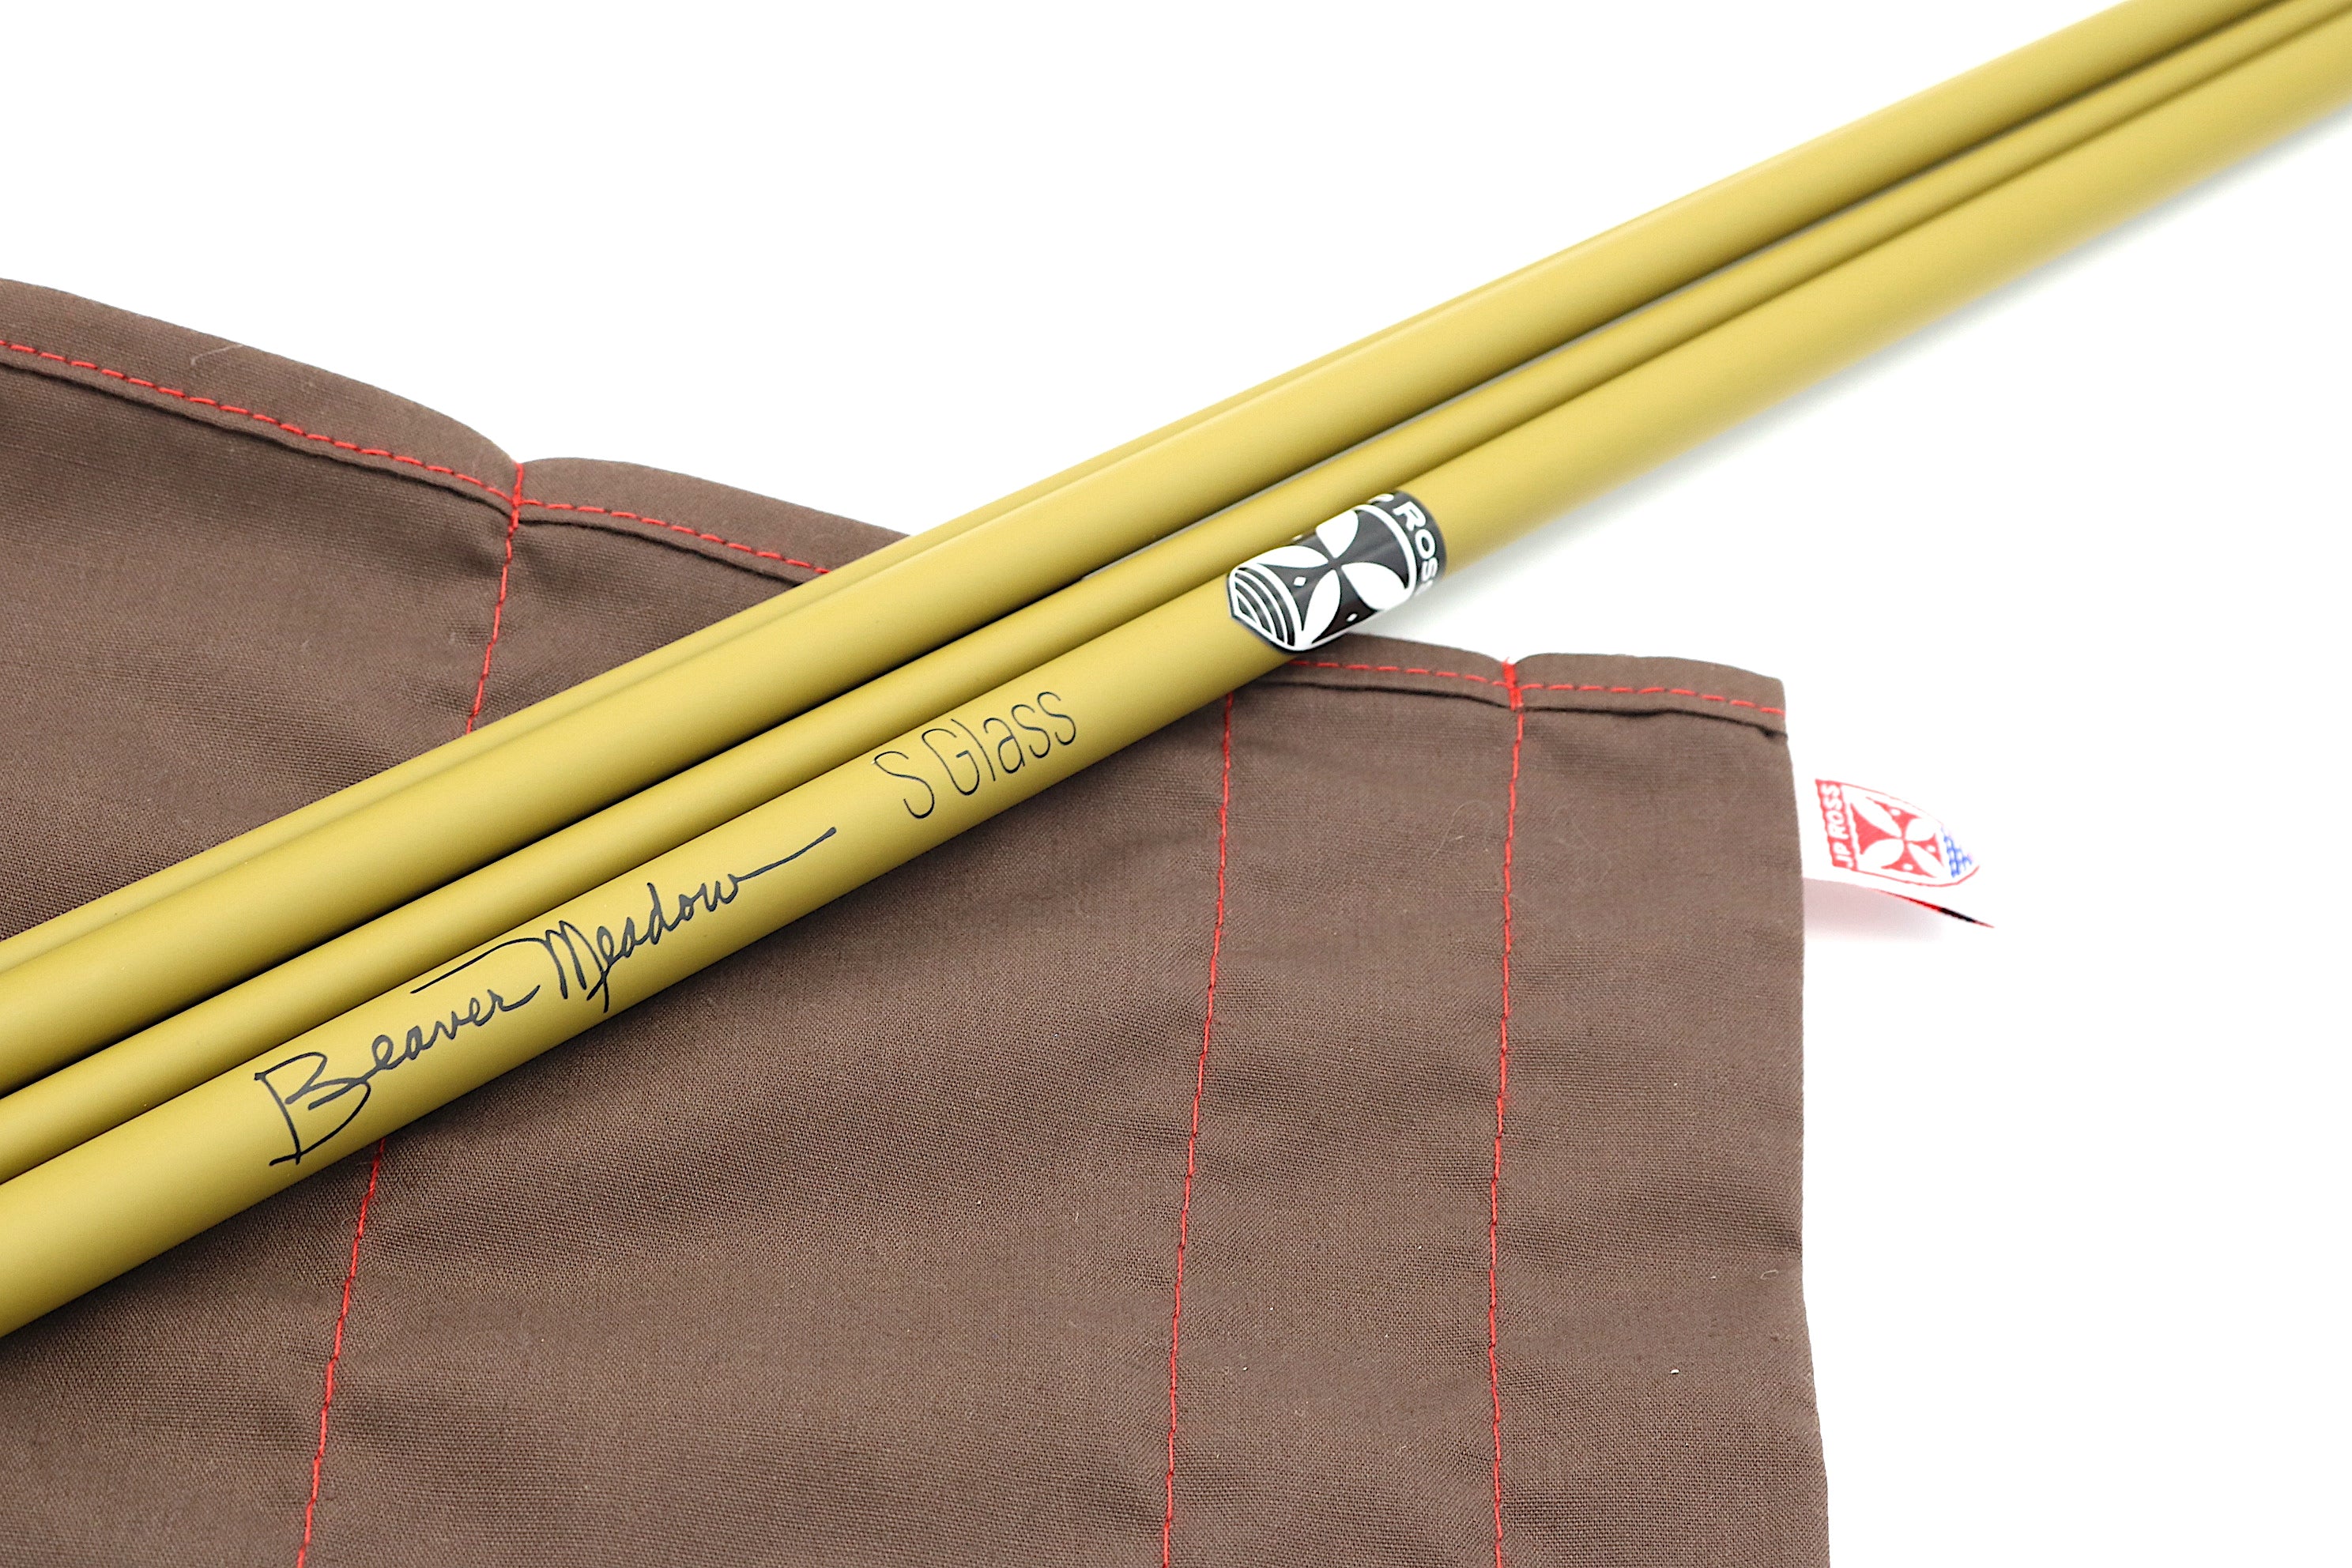 S-Glass Blank for rod builders – JP Ross Fly Rods & Co. Outdoors